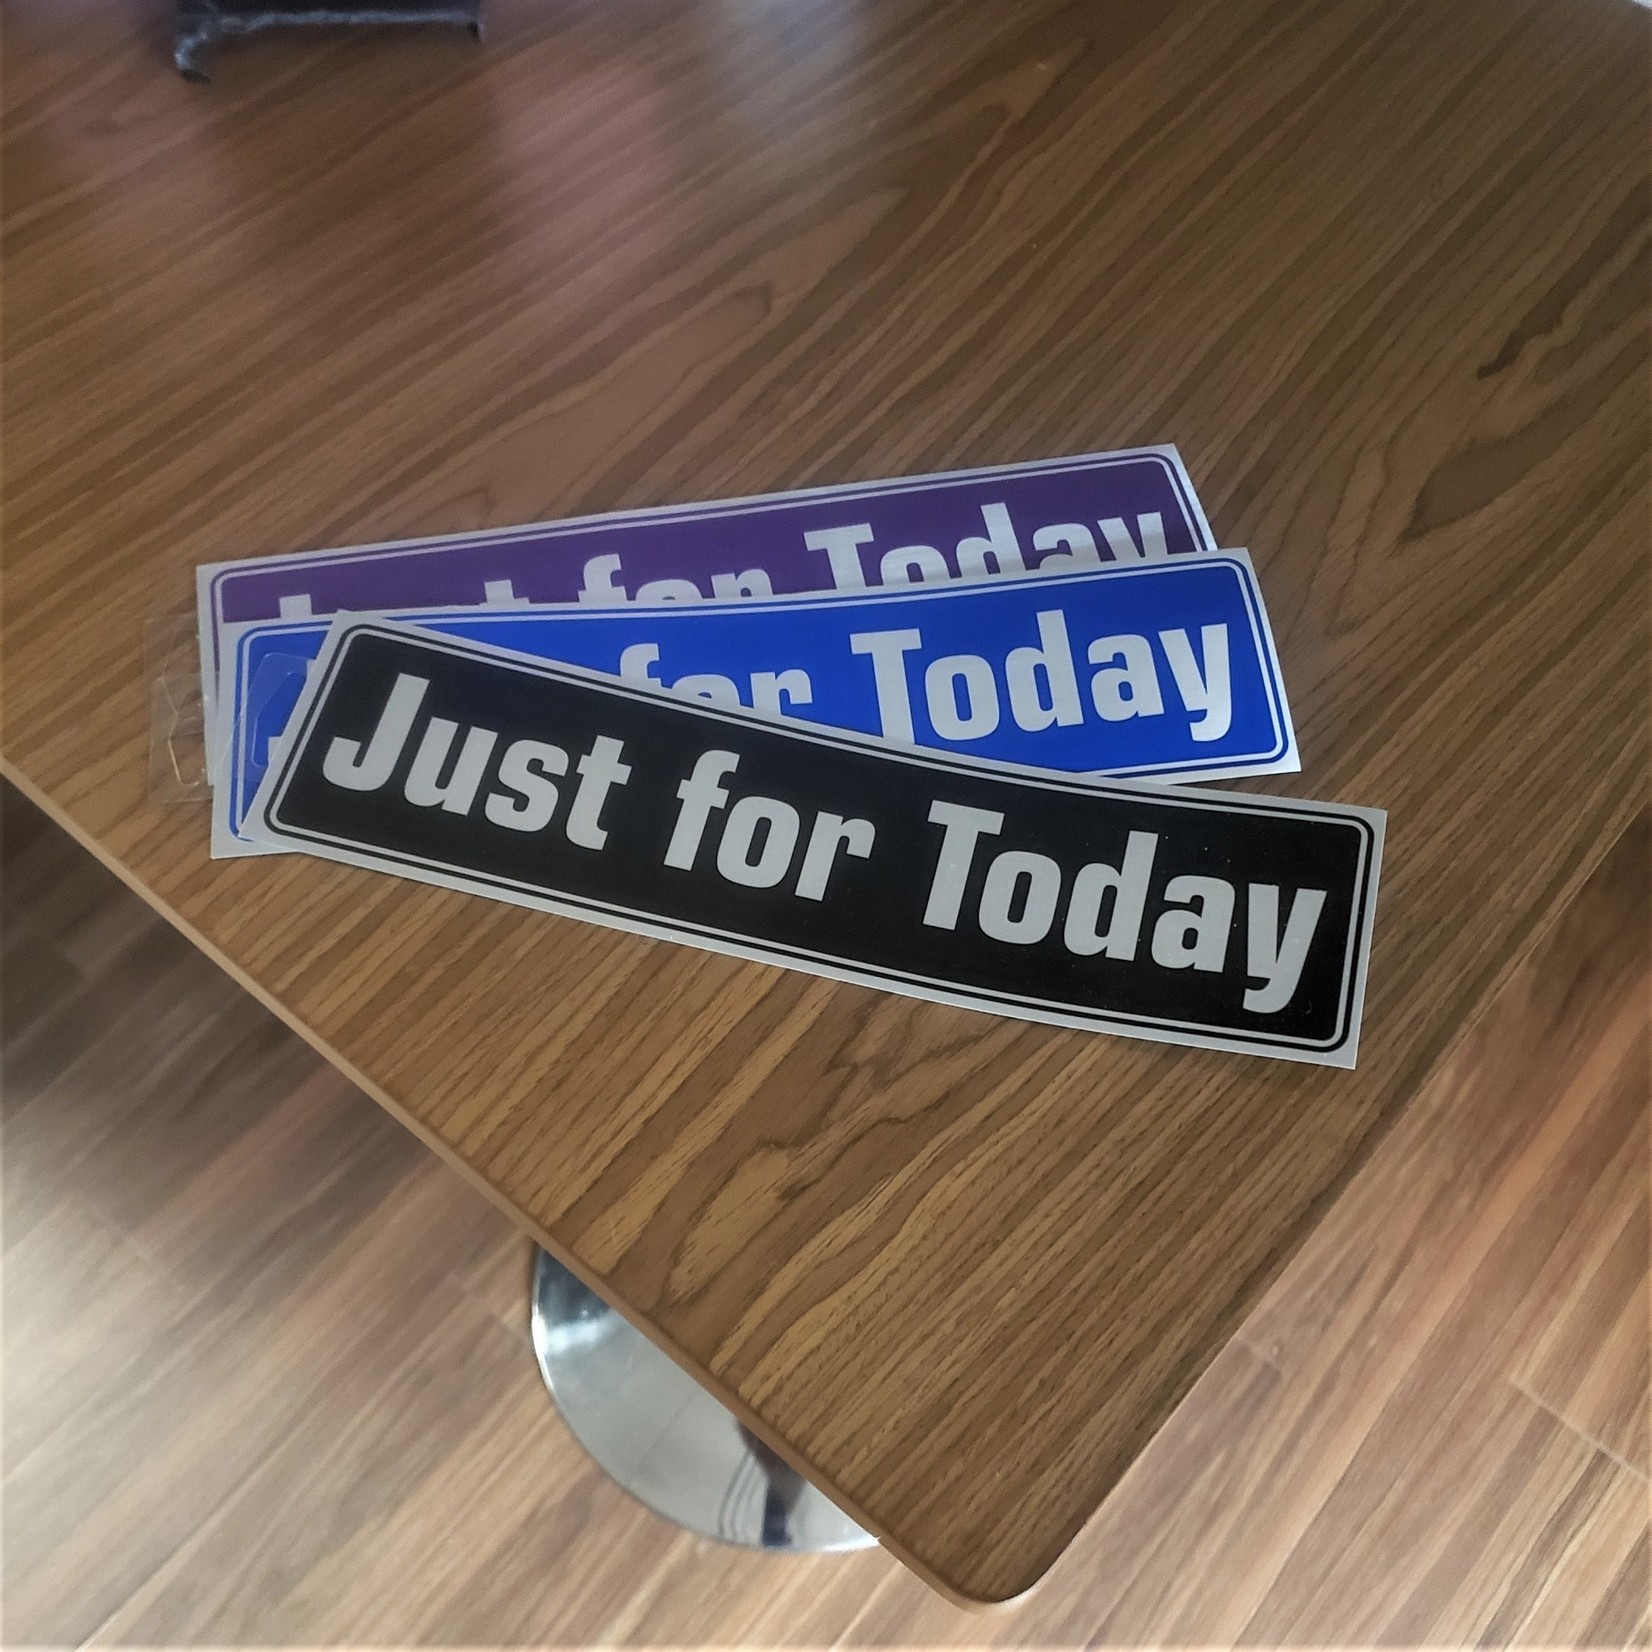 Just For Today [Blue] Bumper Sticker